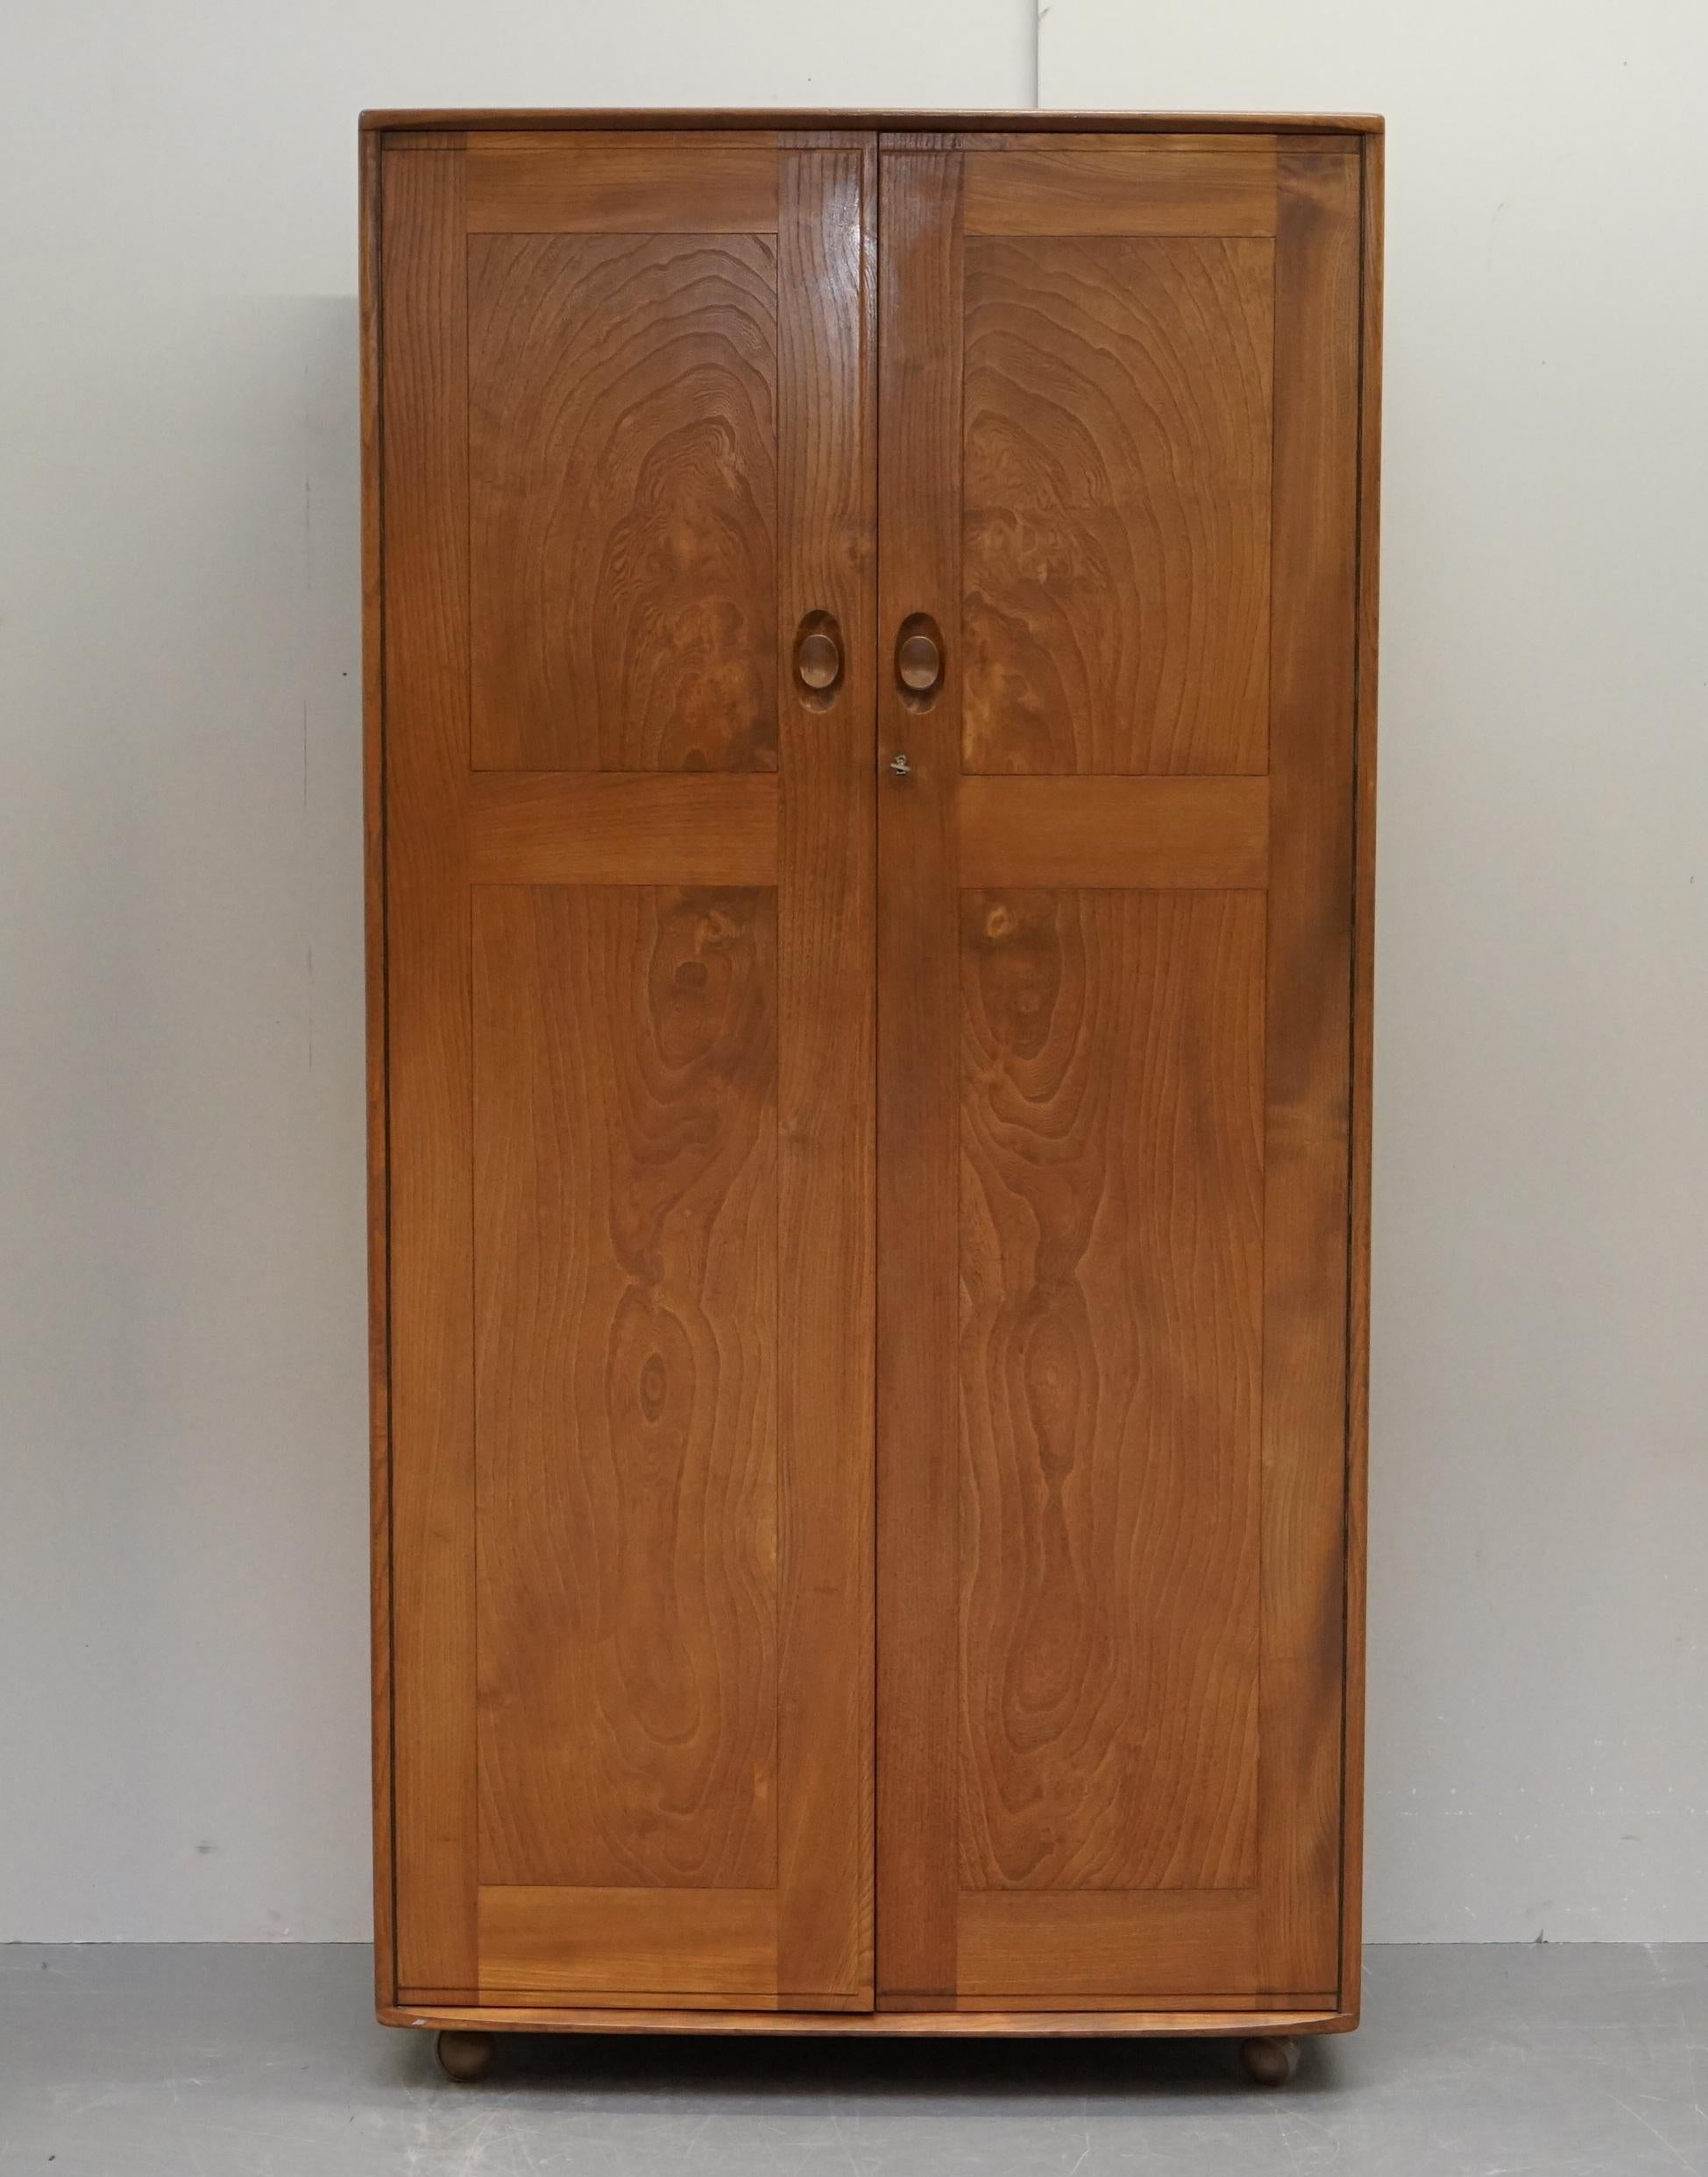 We are delighted to offer this stunning original circa 1960s G-Plan Ercol solid Elm wardrobe which is part of a large suite

This piece is in perfect and I mean absolutely perfect condition, you will be hard pressed to find a single sign of use